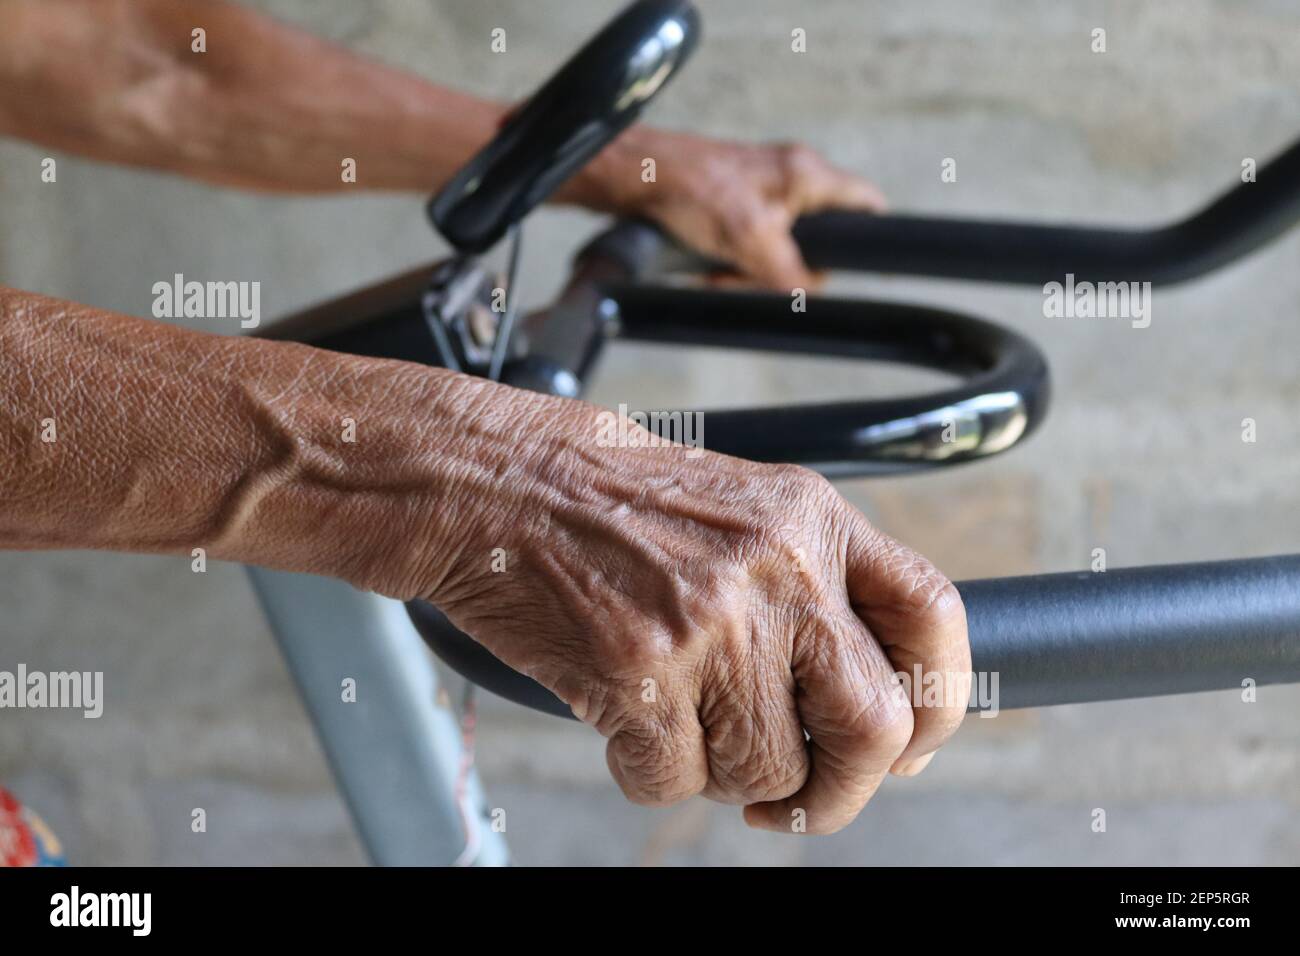 'seniors using current technology' 80 years old mom using a modern exercise bicycle for her daily work out. Stock Photo